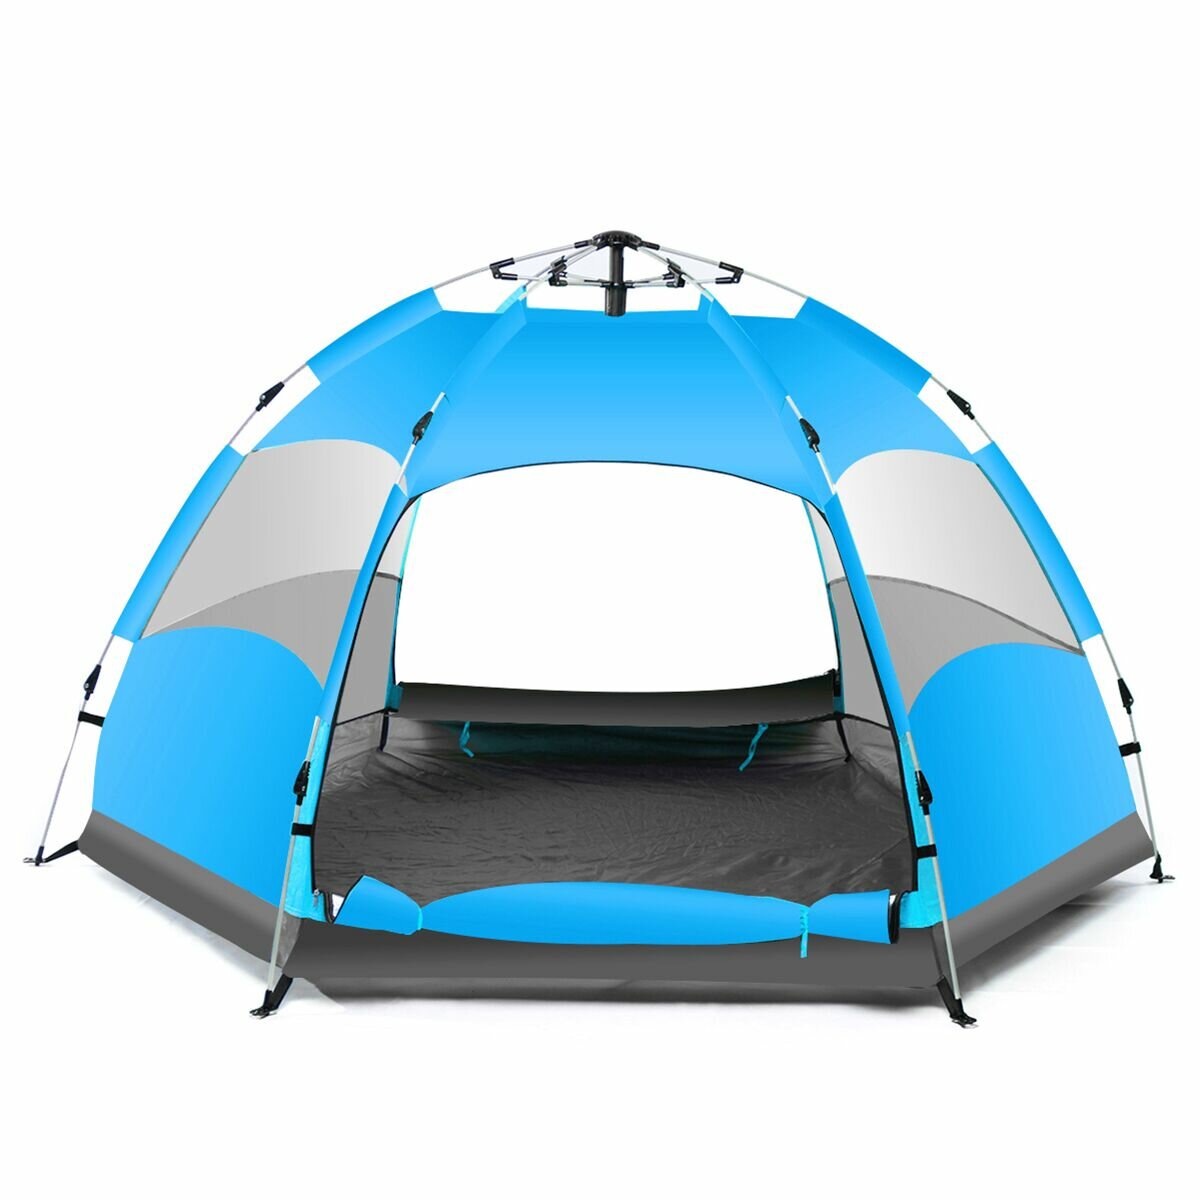 IPRee® 5-7 Persons Automatic Waterproof Large Camping Hiking Tent Outdoor Base Camp Blue/Orange